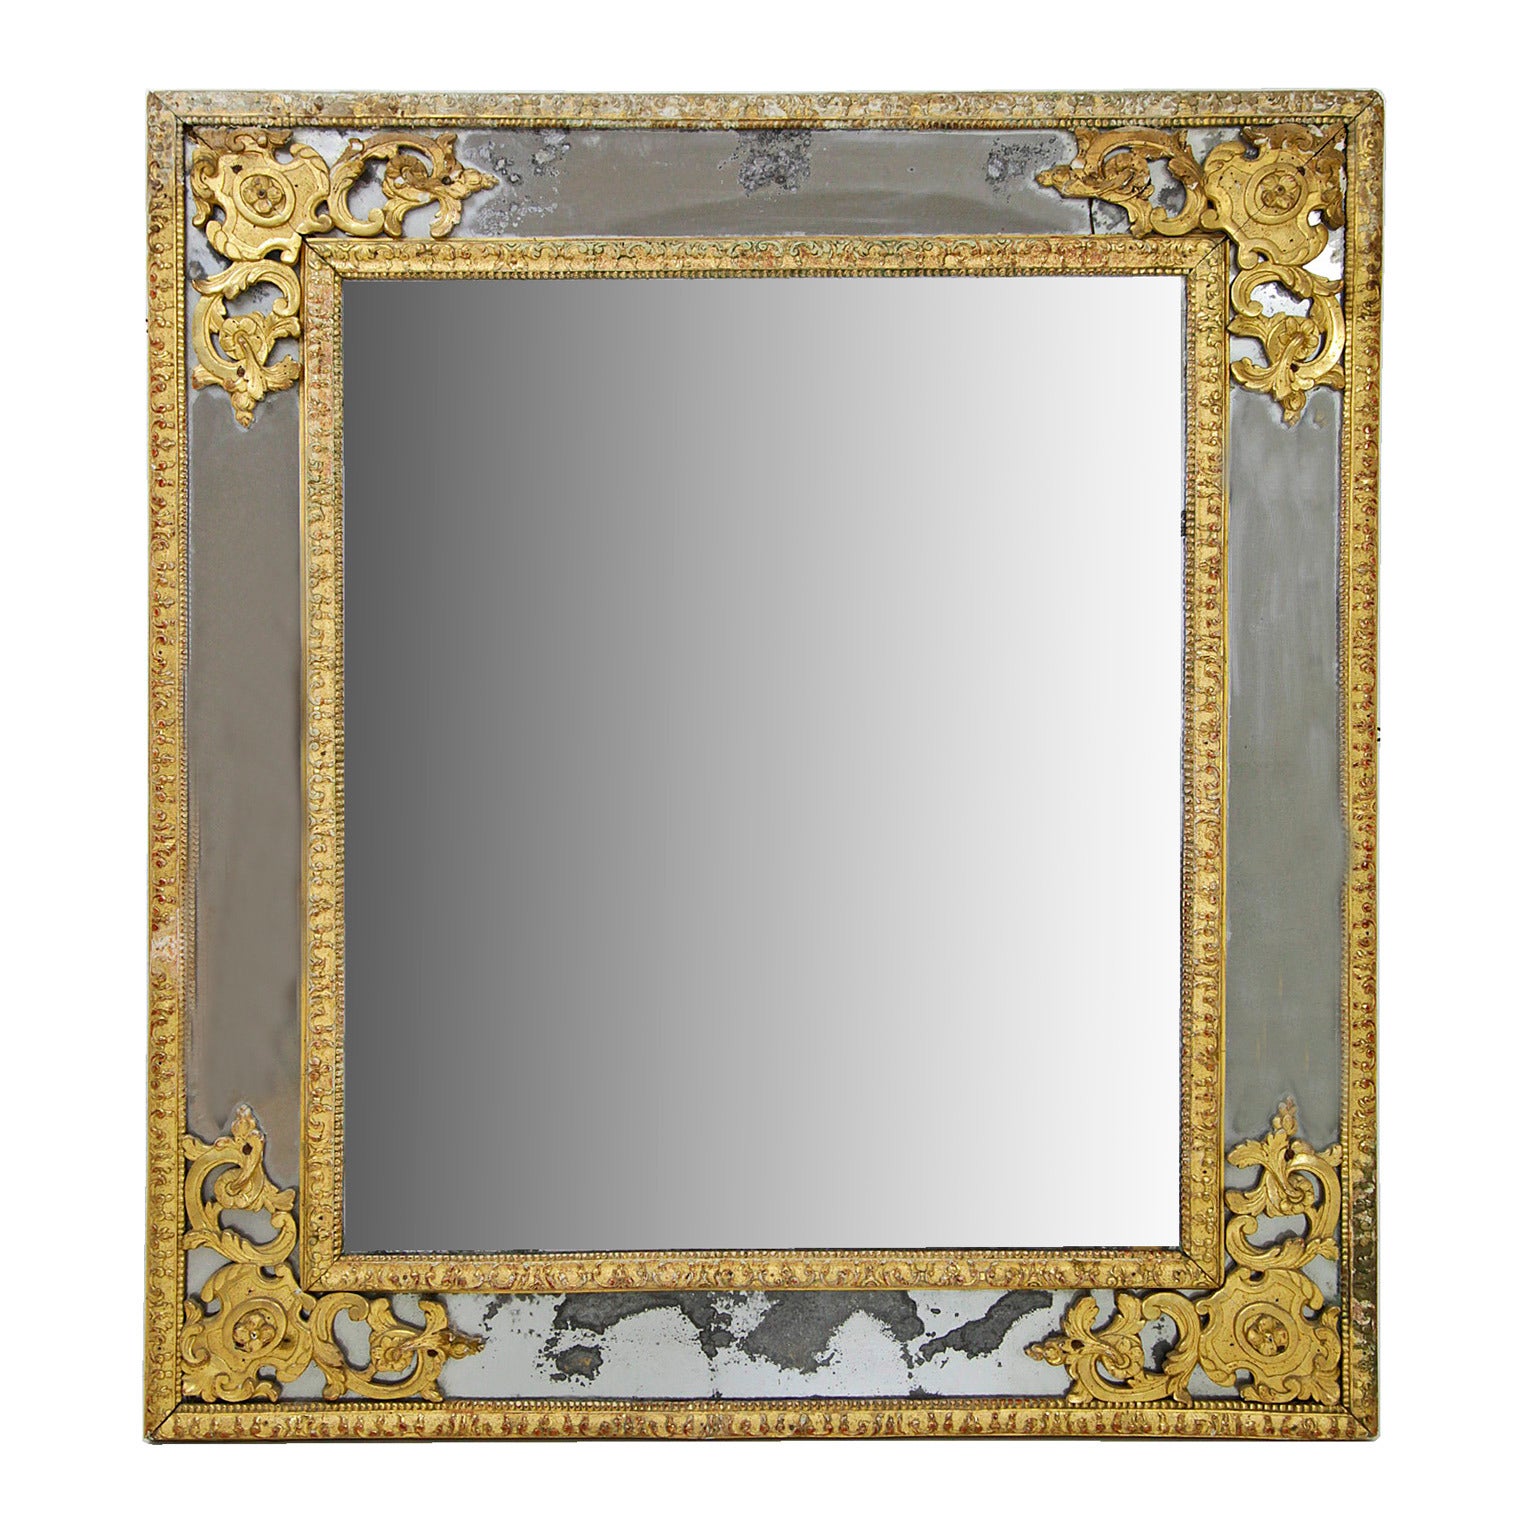 Beautiful French Régence Mirror, Early 18th Century